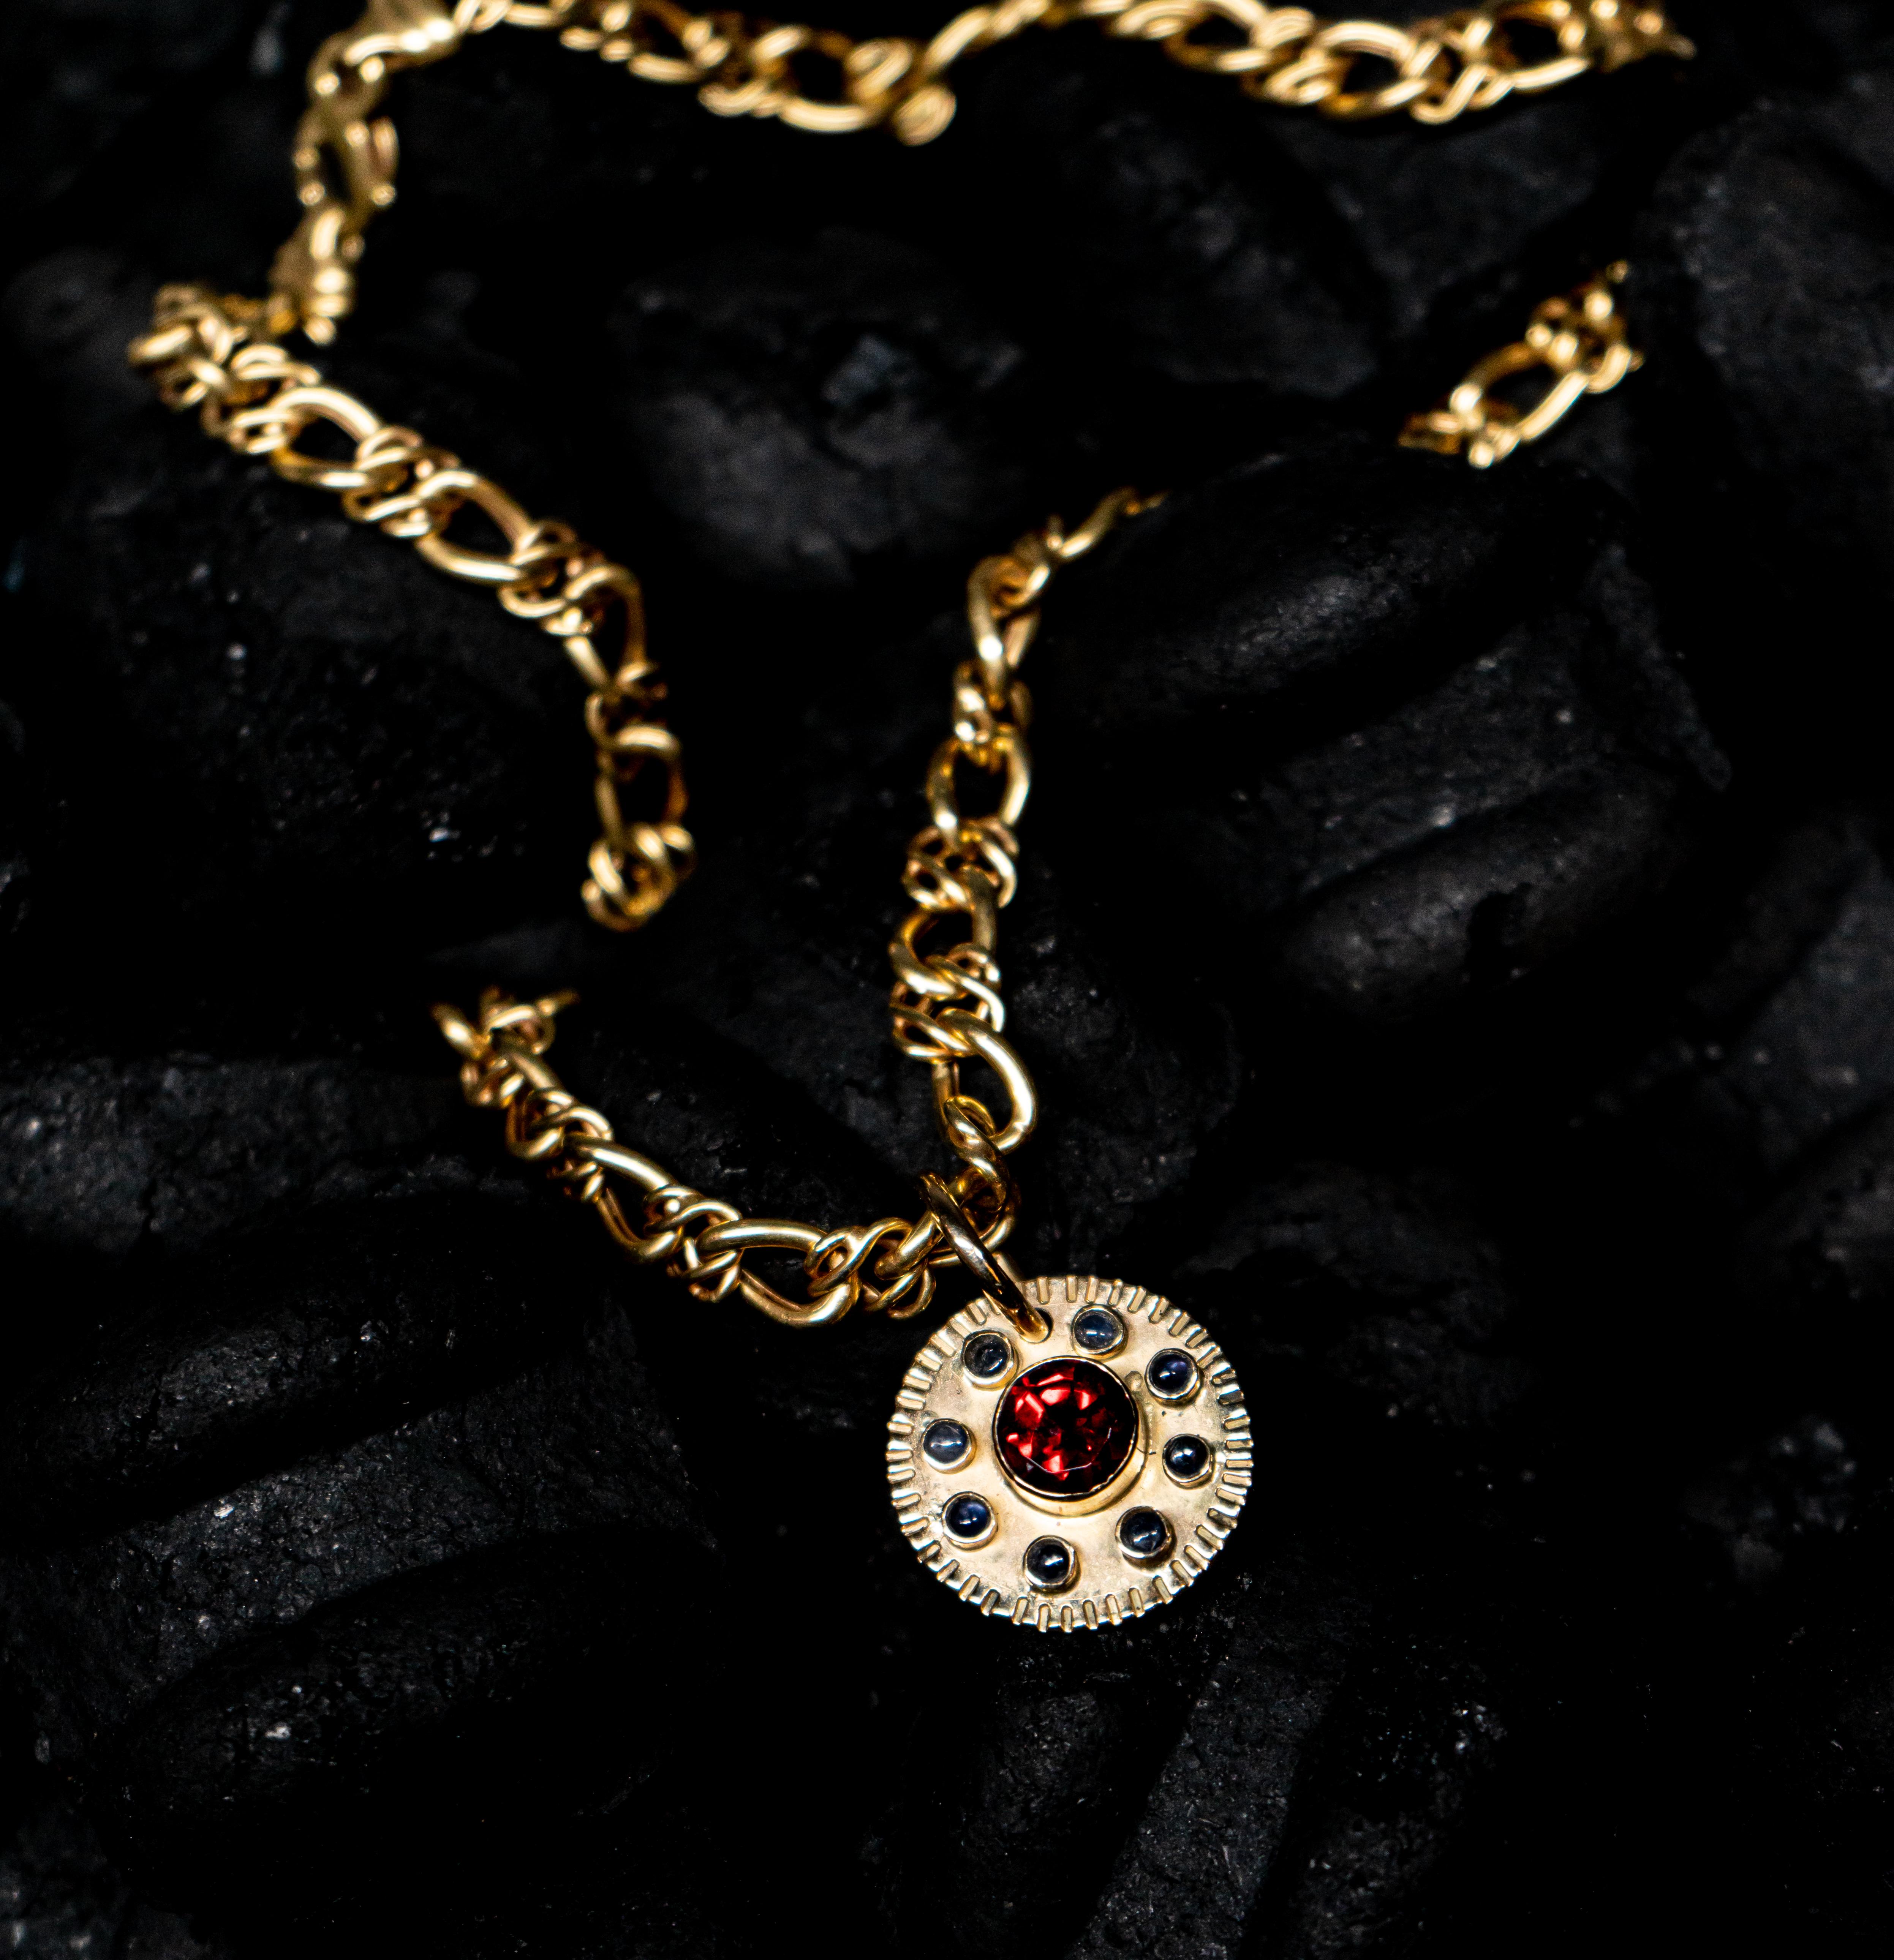 The aztec sun is highlighted pendant, with a weight of 10 grams of solid gold 18k, with a central granate of 0,30 carat and 8 sapphires that surround the central stone is a artesian design inspired by aztec culture of mexico.
